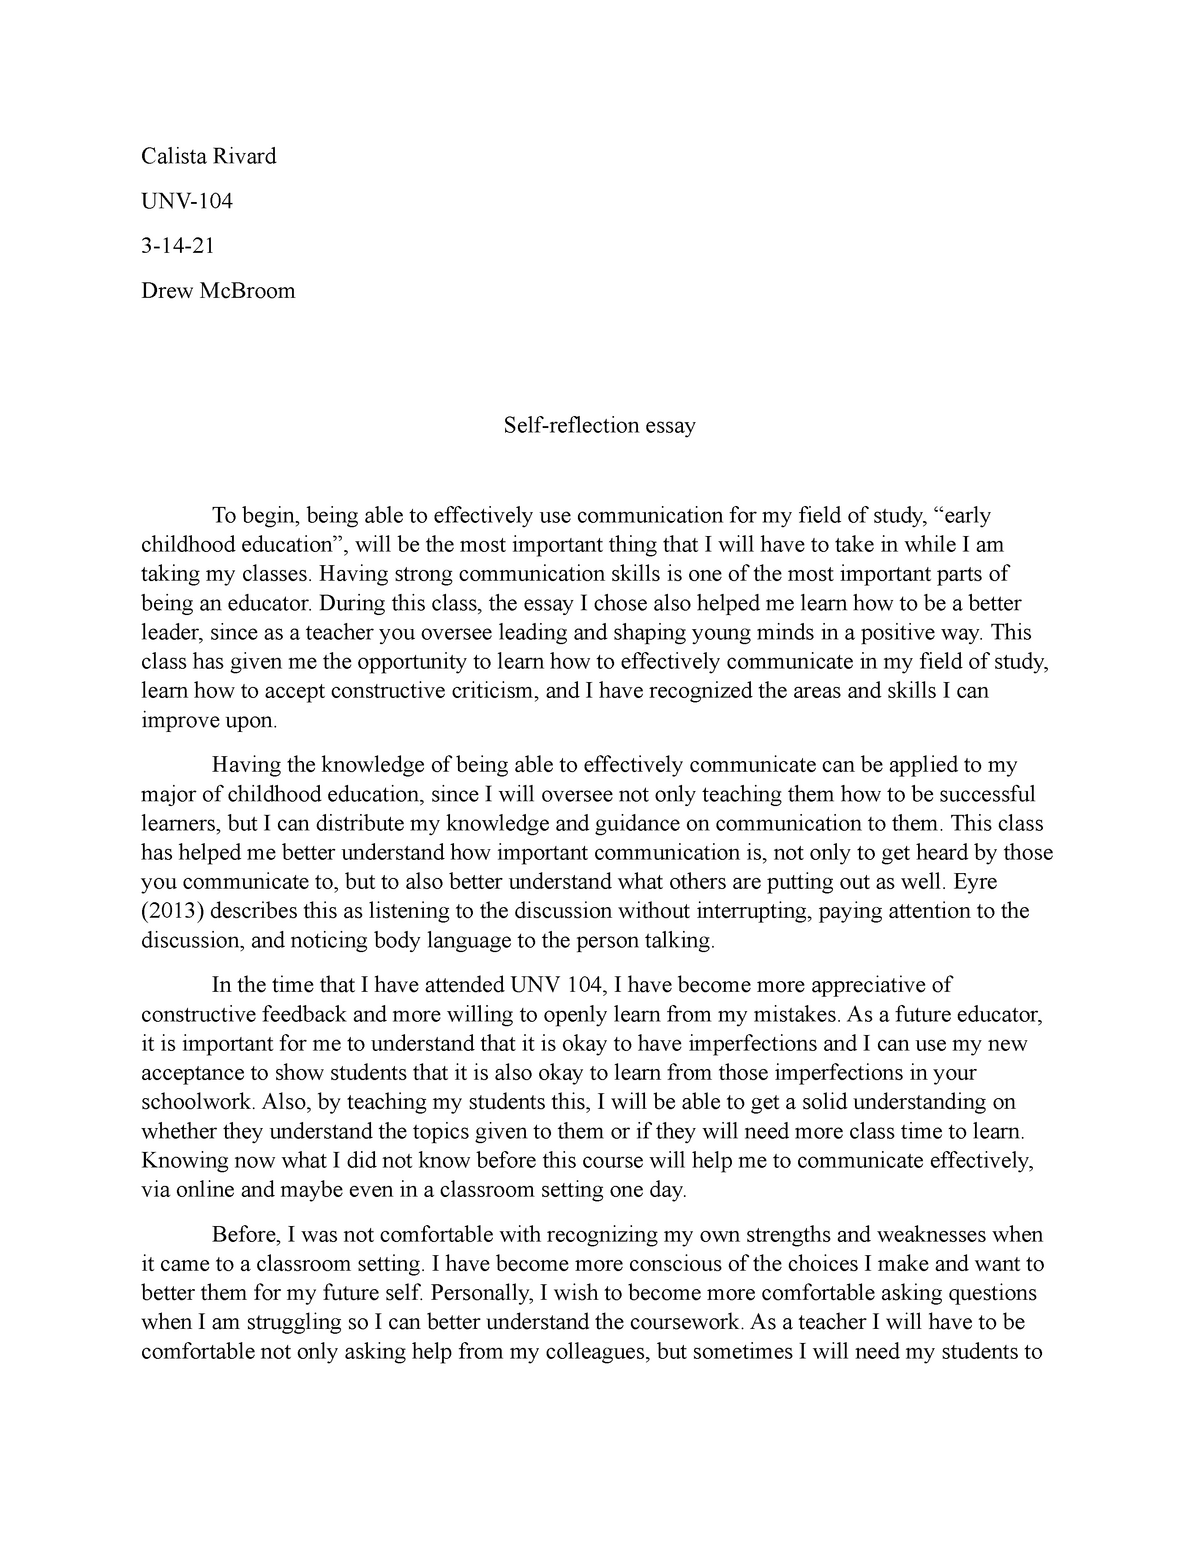 self reflection research essay